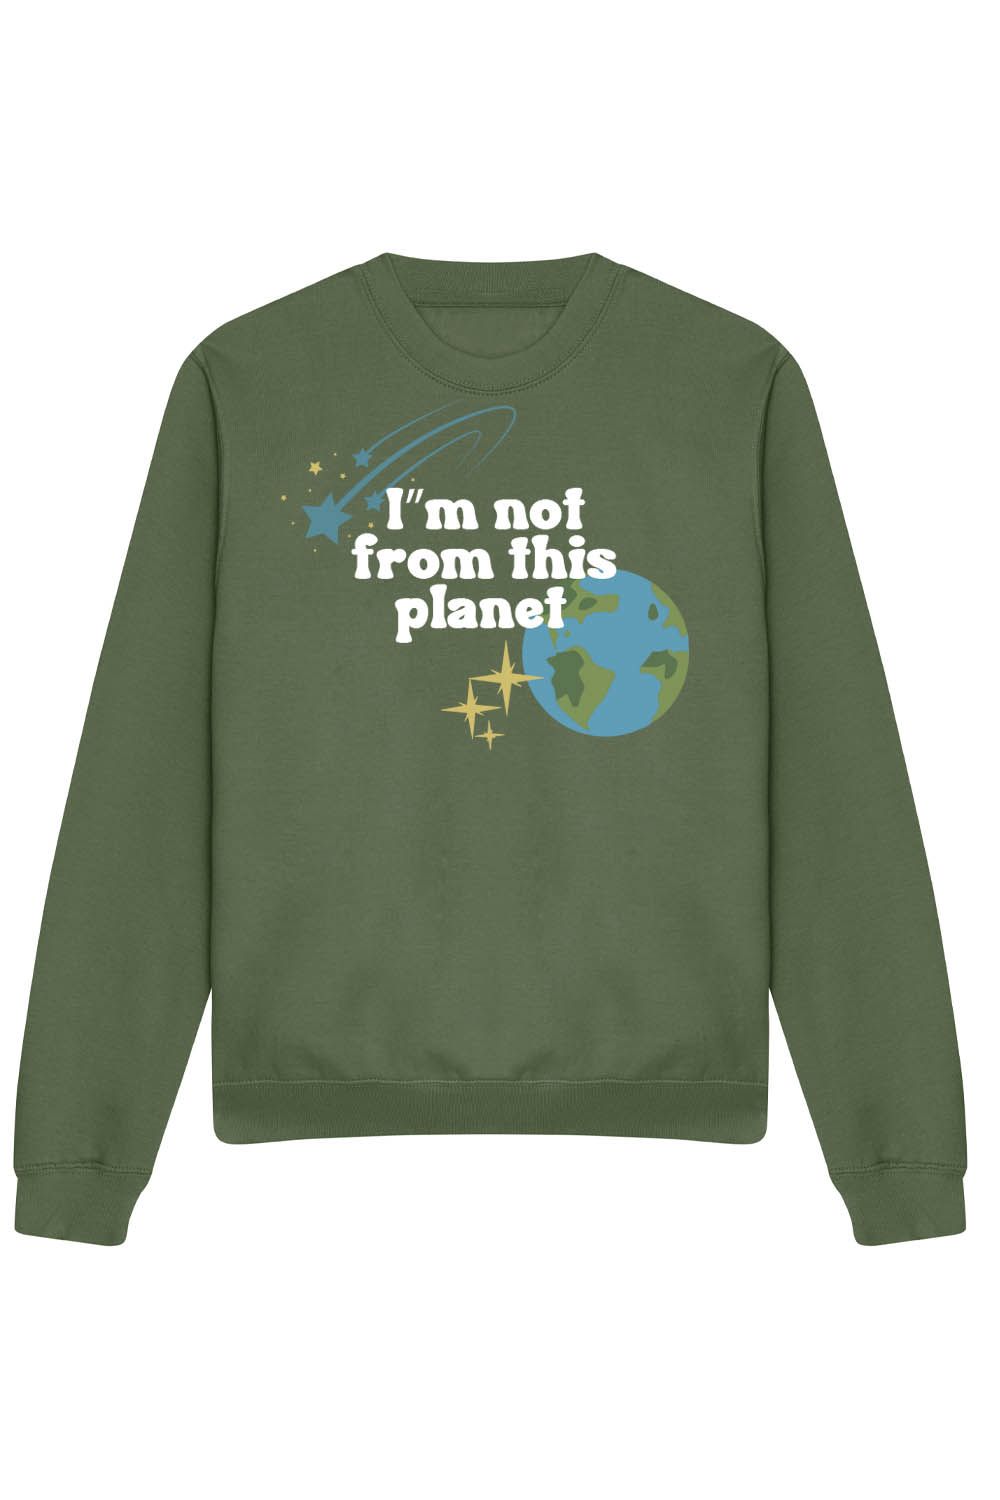 I'm Not From This Planet Sweatshirt in Dusty Green (Custom Packs)